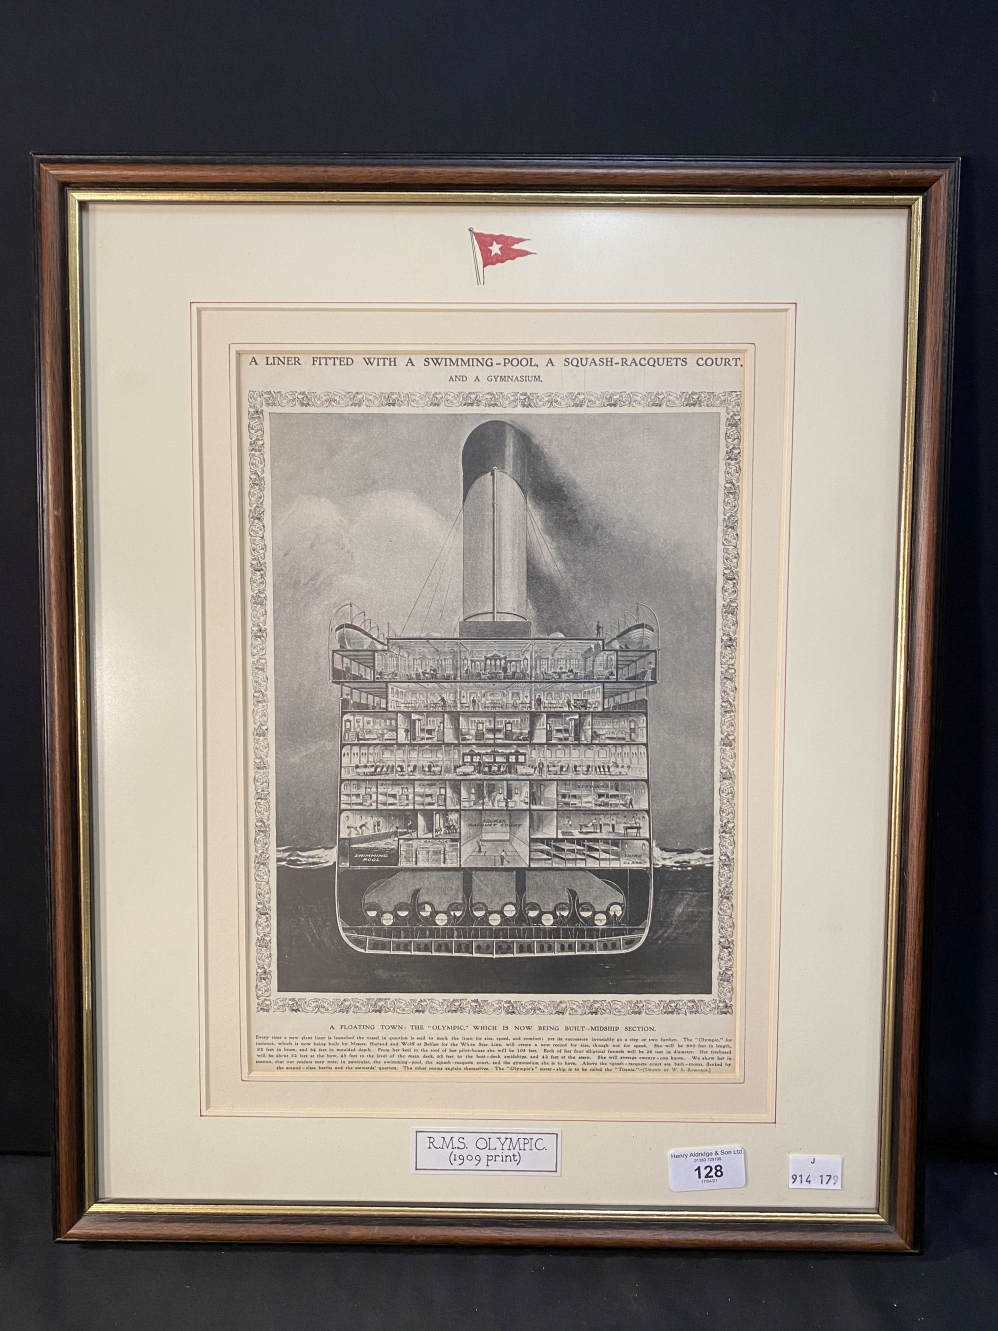 R.M.S. OLYMPIC: Period cross sectional print showing Titanic's sister, circa 1909, framed and